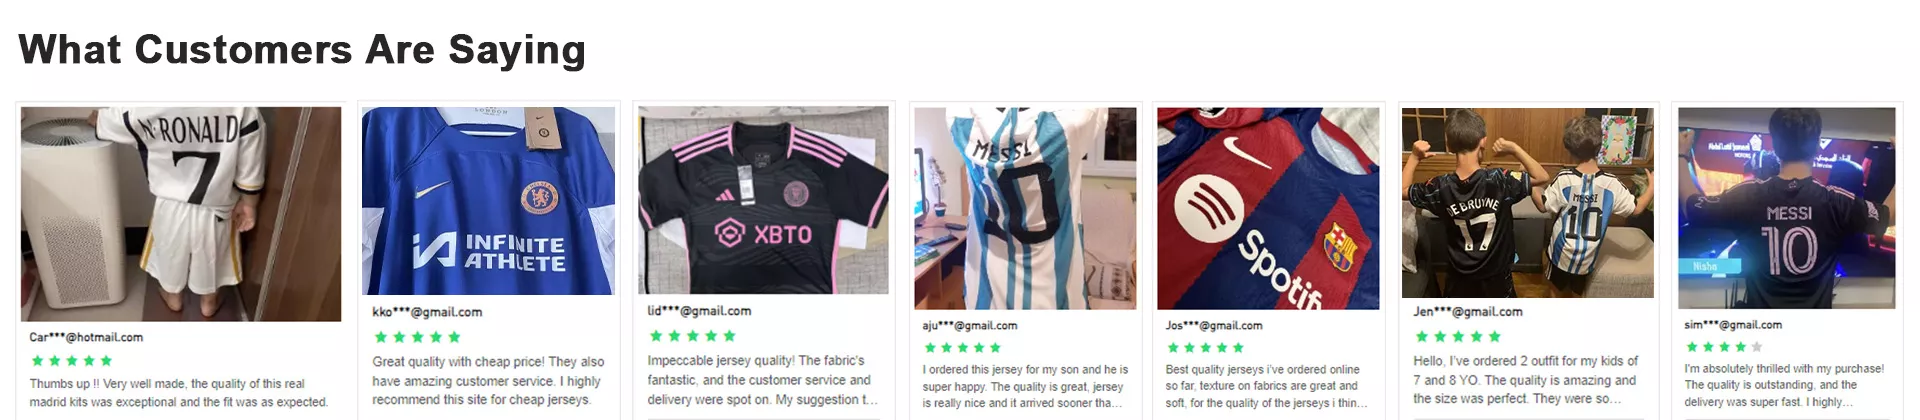 What Customers Are Saying - bestsoccerstore